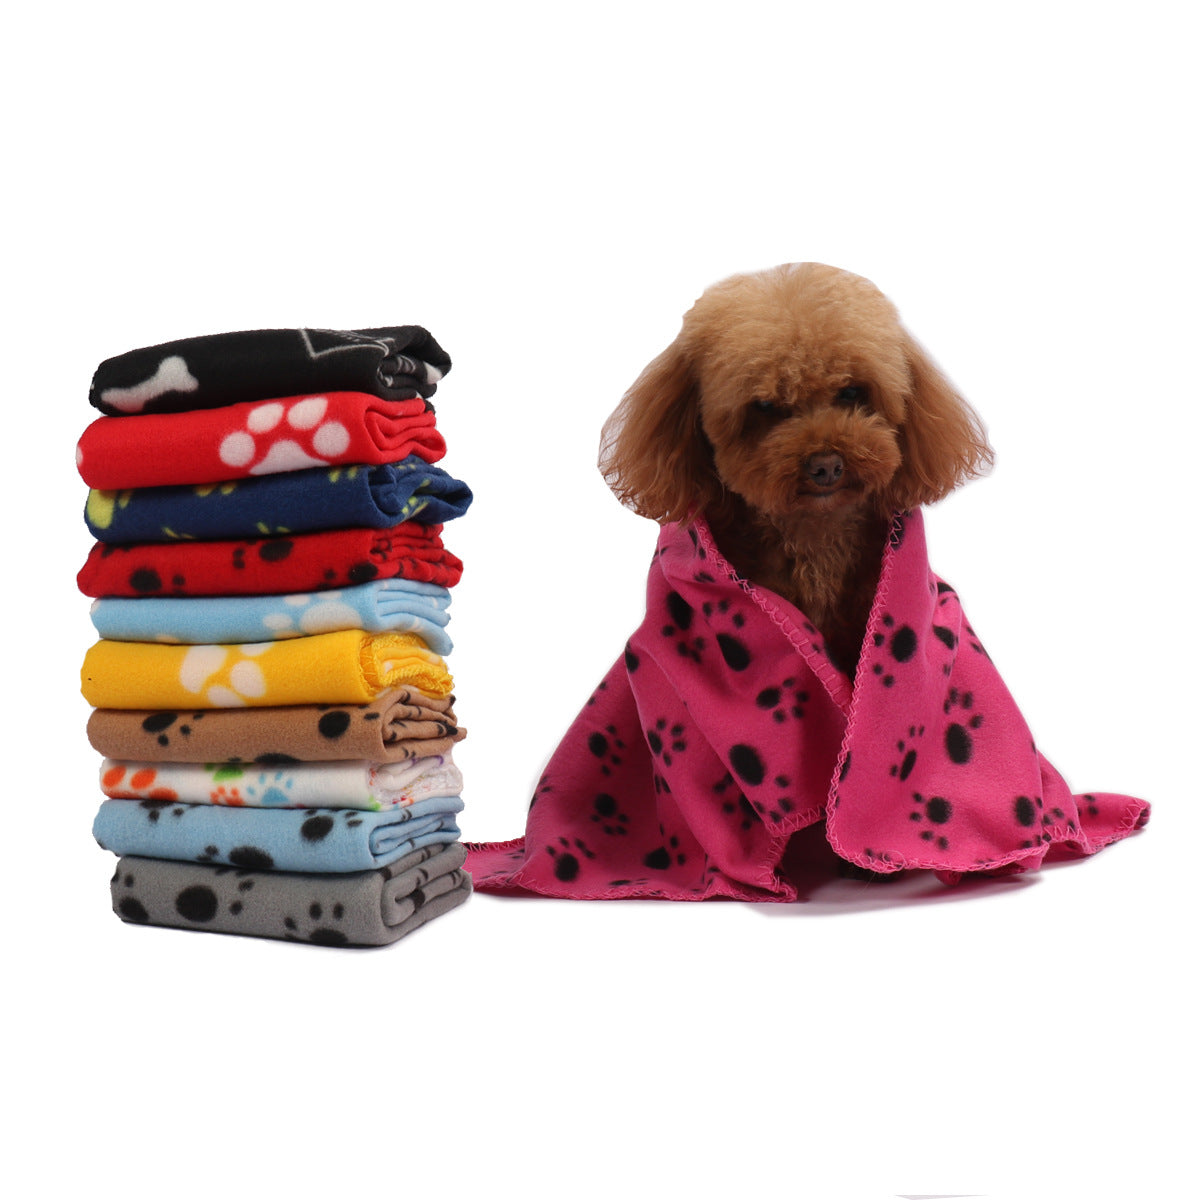 Factory Double-Sided Wool Blanket For Warm Dog Paw Print Pet Blanket For Pets